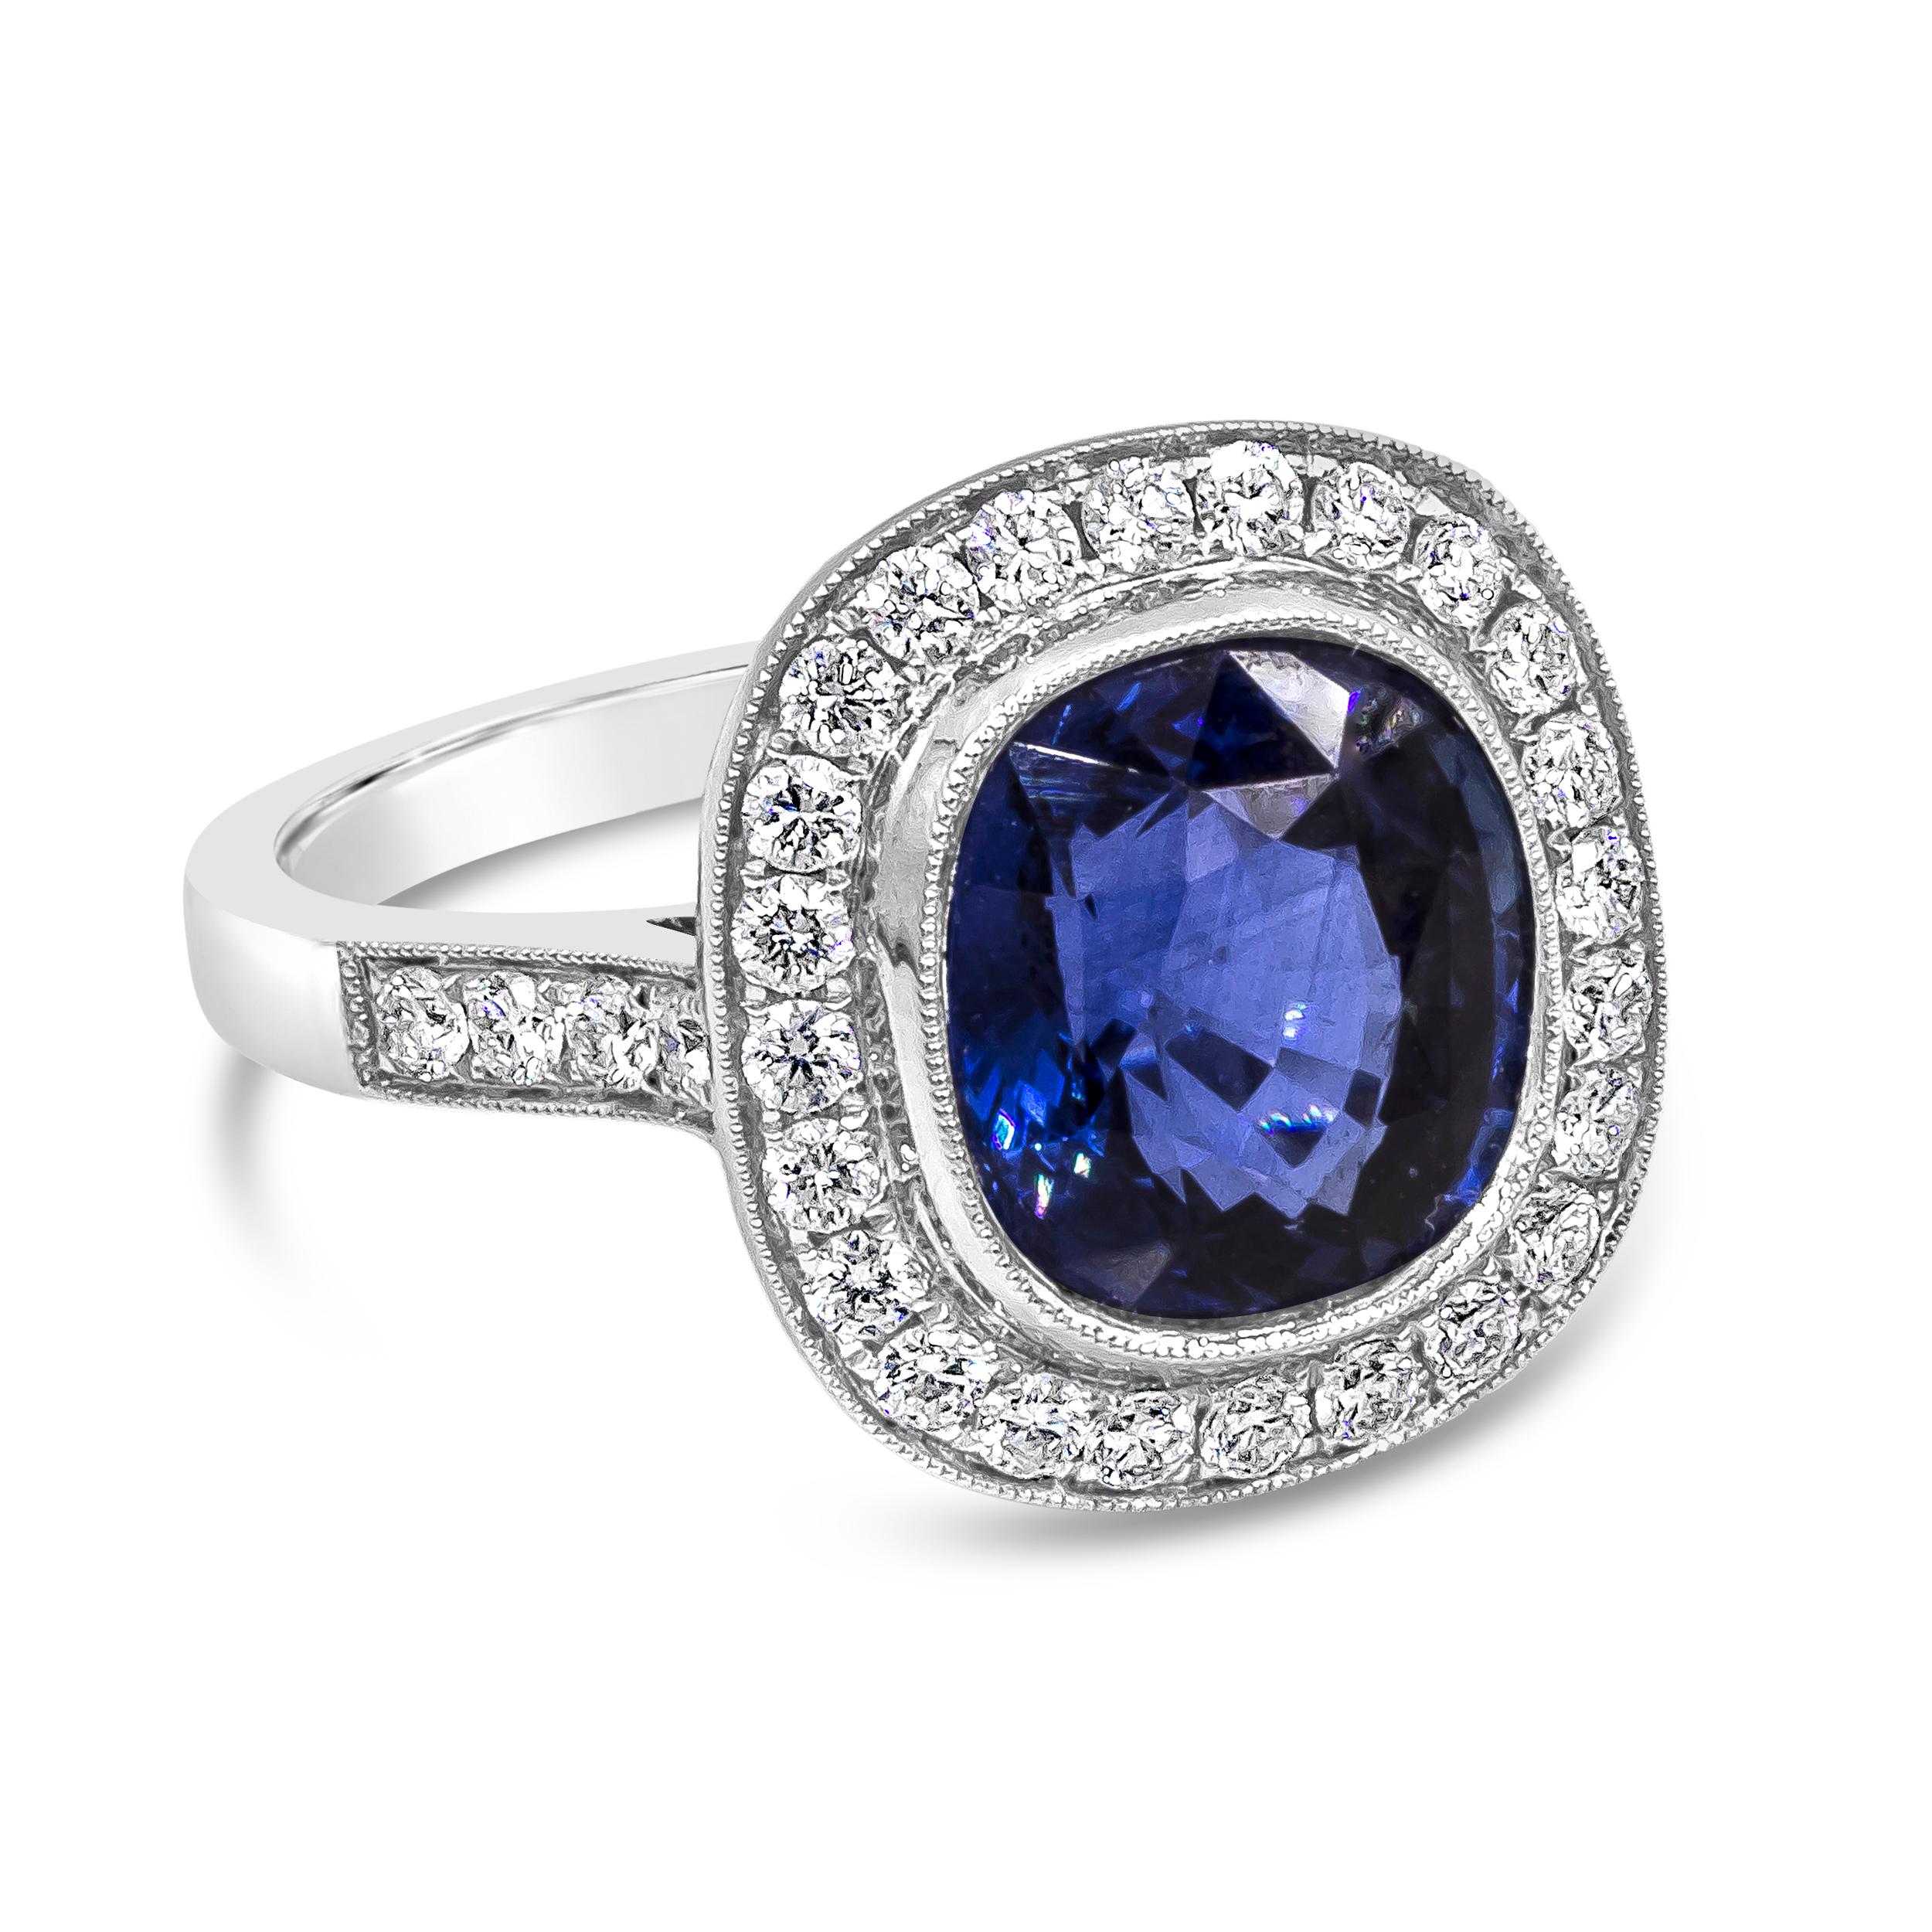 A vintage-style engagement ring showcasing a 4.12 carat cushion cut blue sapphire, surrounded by a single row of bezel-set halo round brilliant diamonds. Set in an 18K white gold mounting accented with diamonds. Finished with milgrain design on the